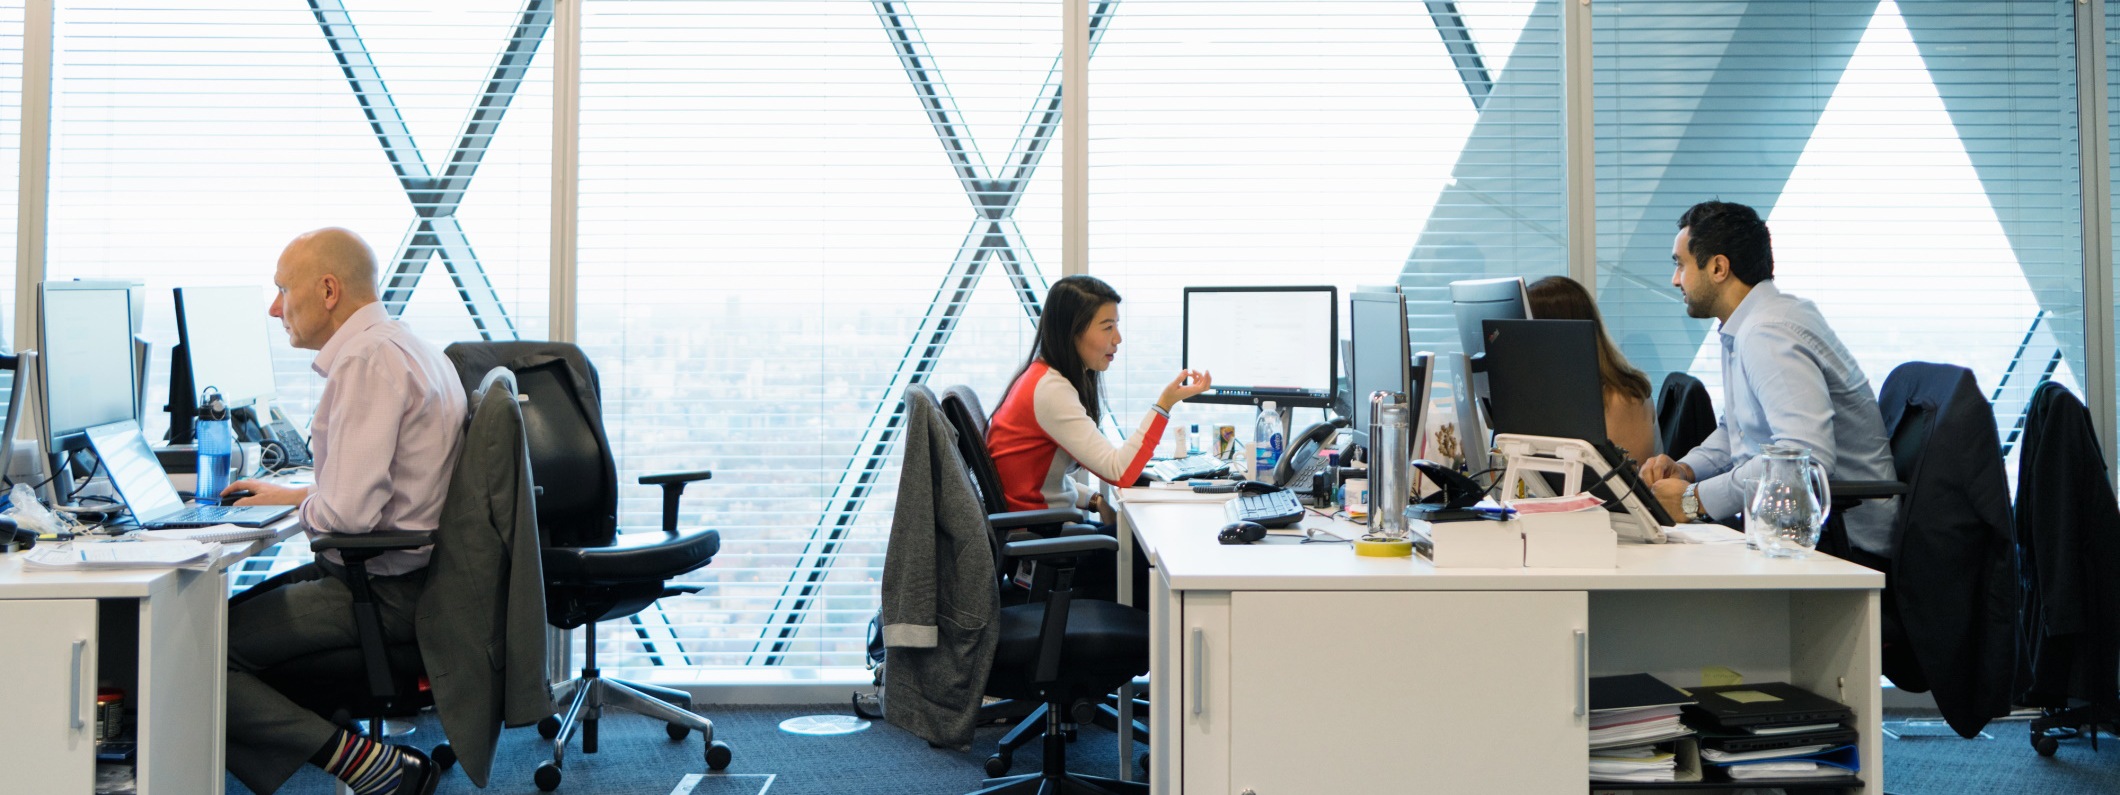 A female and male office worker in conversation, facing each other at shared workstation in open office setting. 